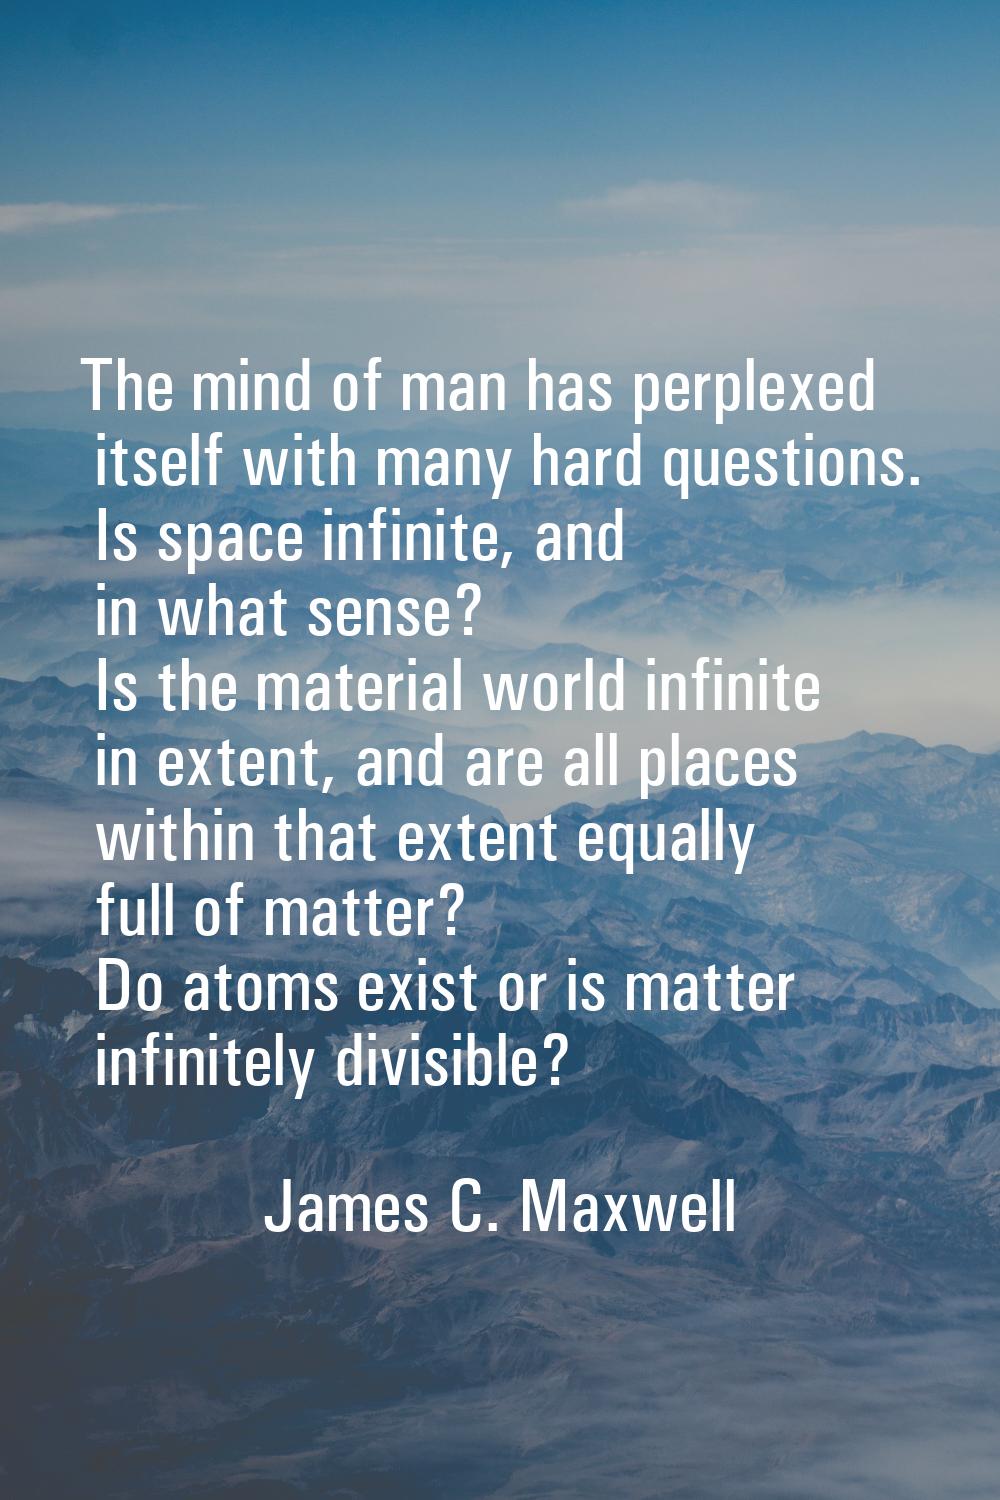 The mind of man has perplexed itself with many hard questions. Is space infinite, and in what sense